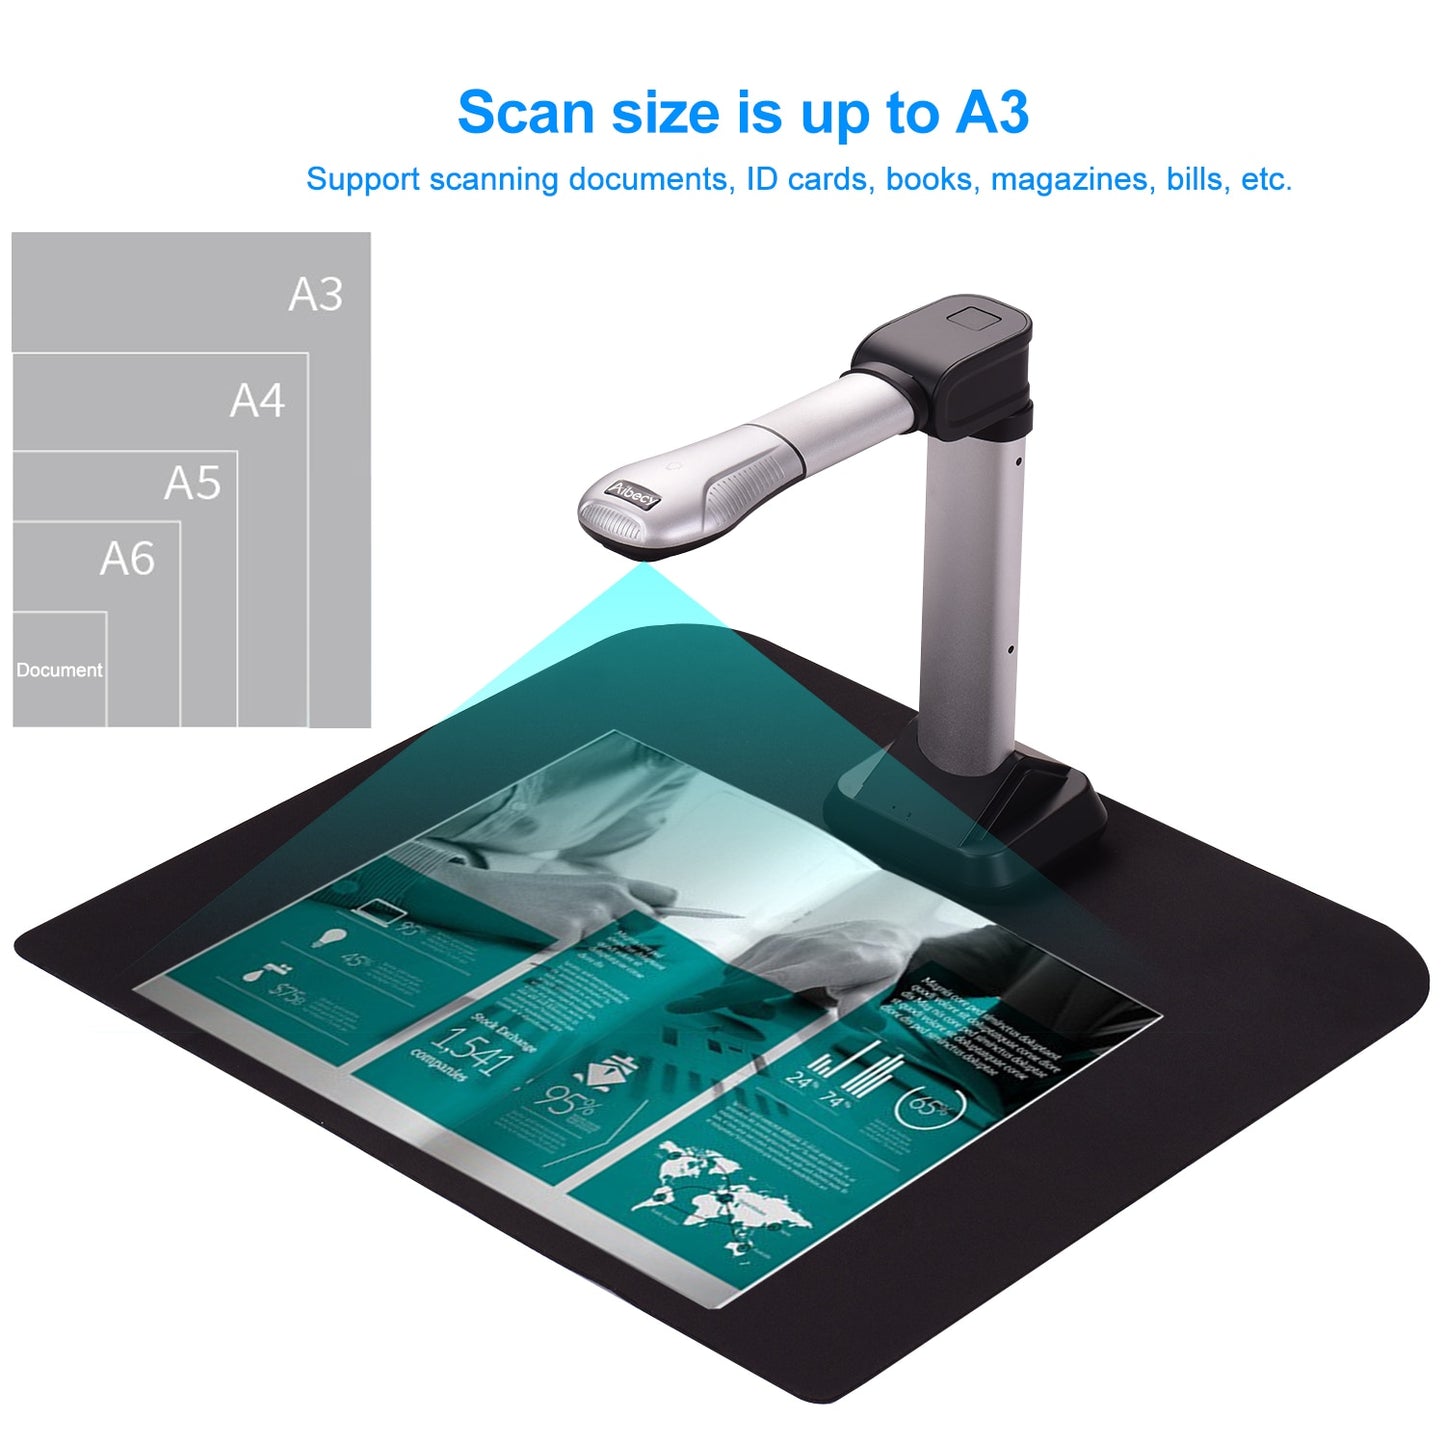 Aibecy Bk51 Usb Document Camera Scanner Capture Size A3 Hd 16 Mega-pixels High Speed Scanner With Led Light For Id Cards - Scanners